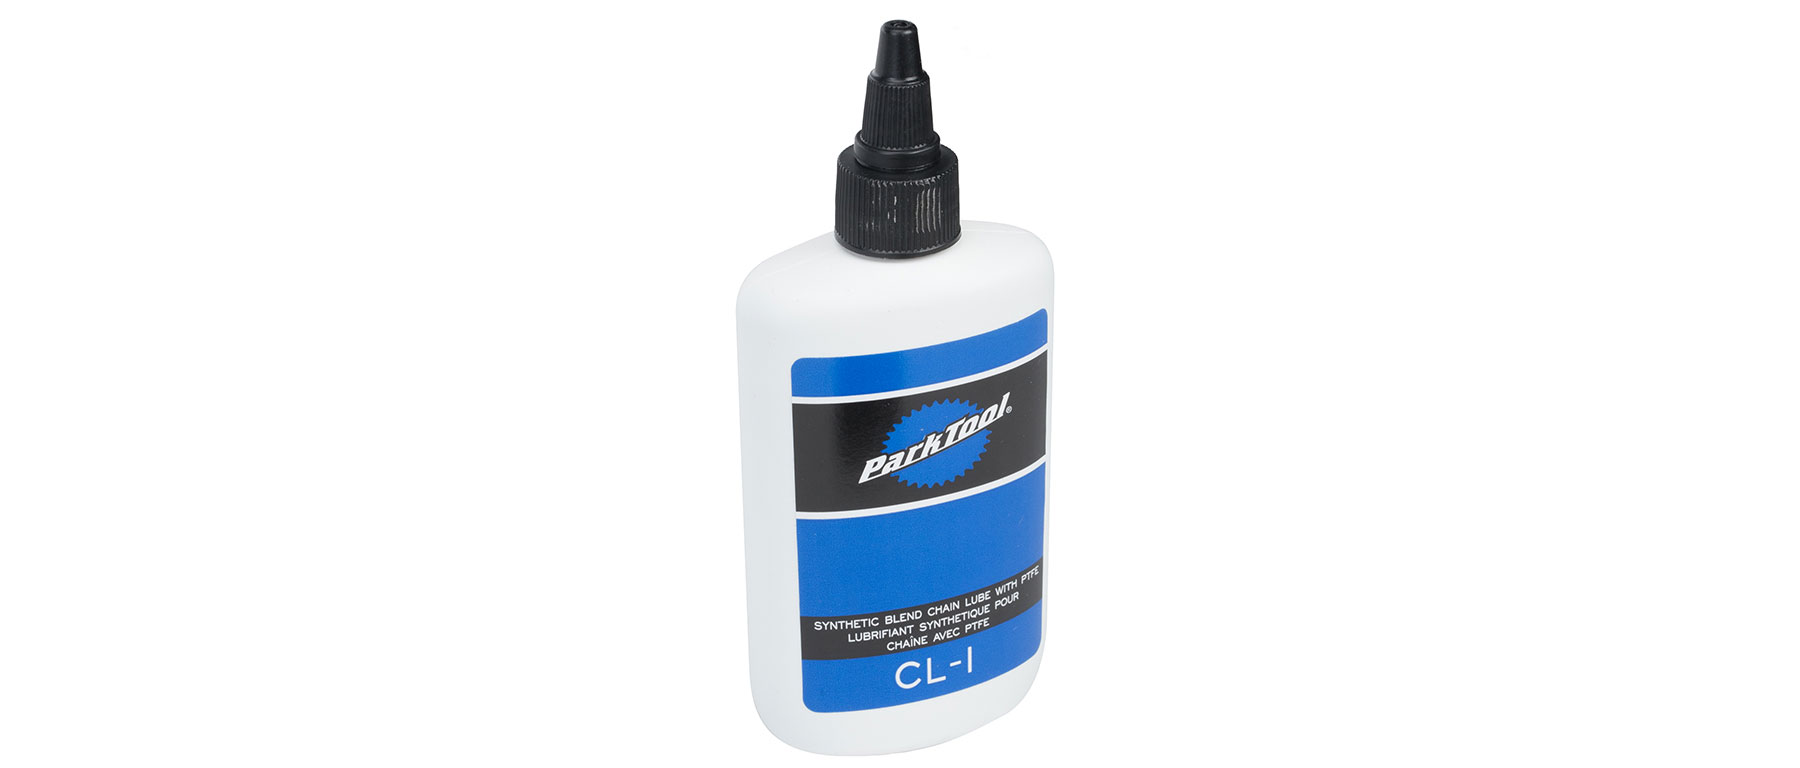 Park Tool CL-1 Synthetic Blend Chain Lube